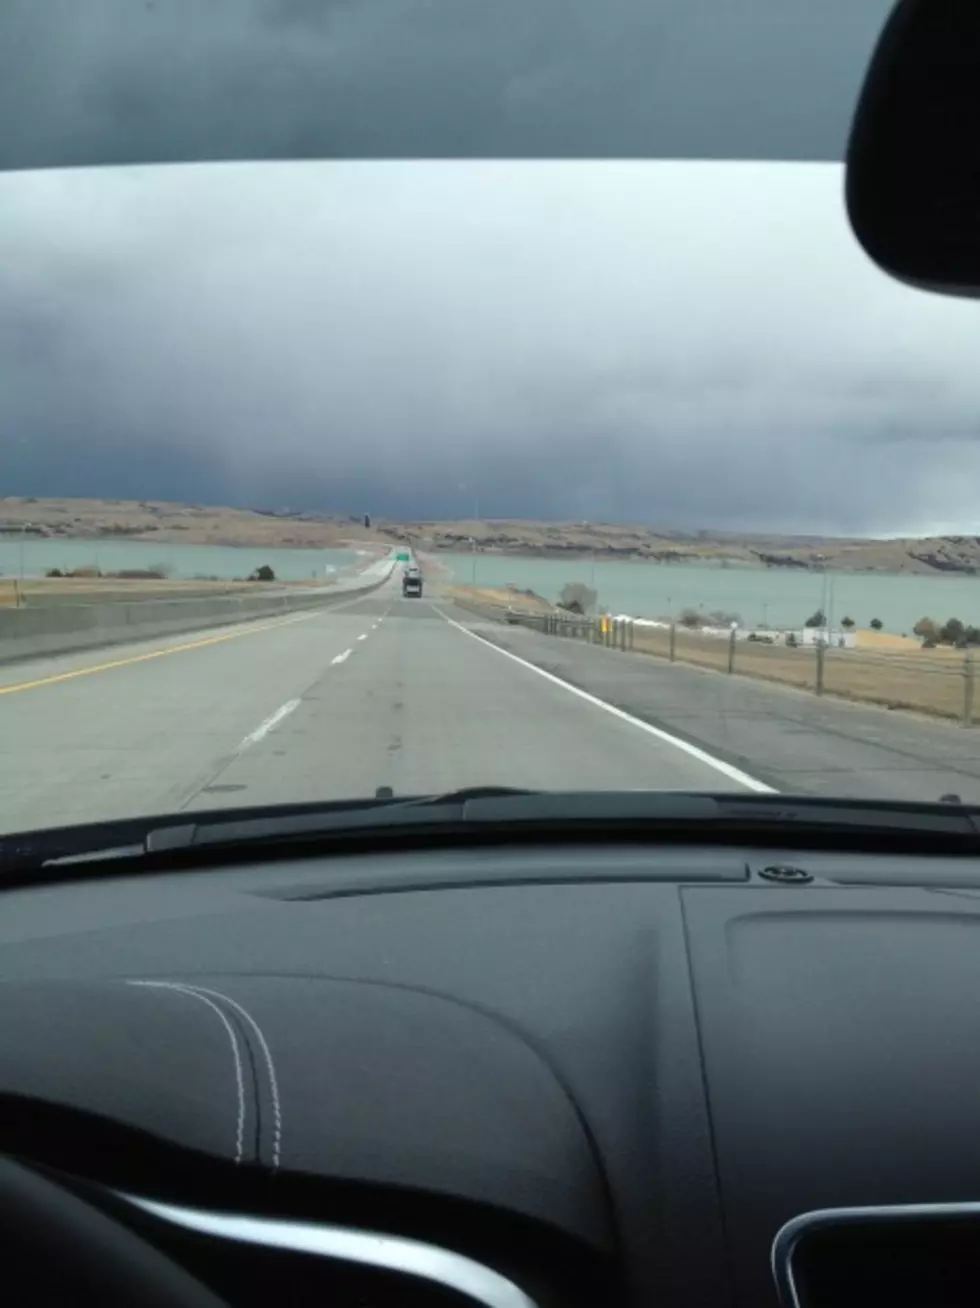 An Experience Out West Showed All The Different Weather Patterns of South Dakota